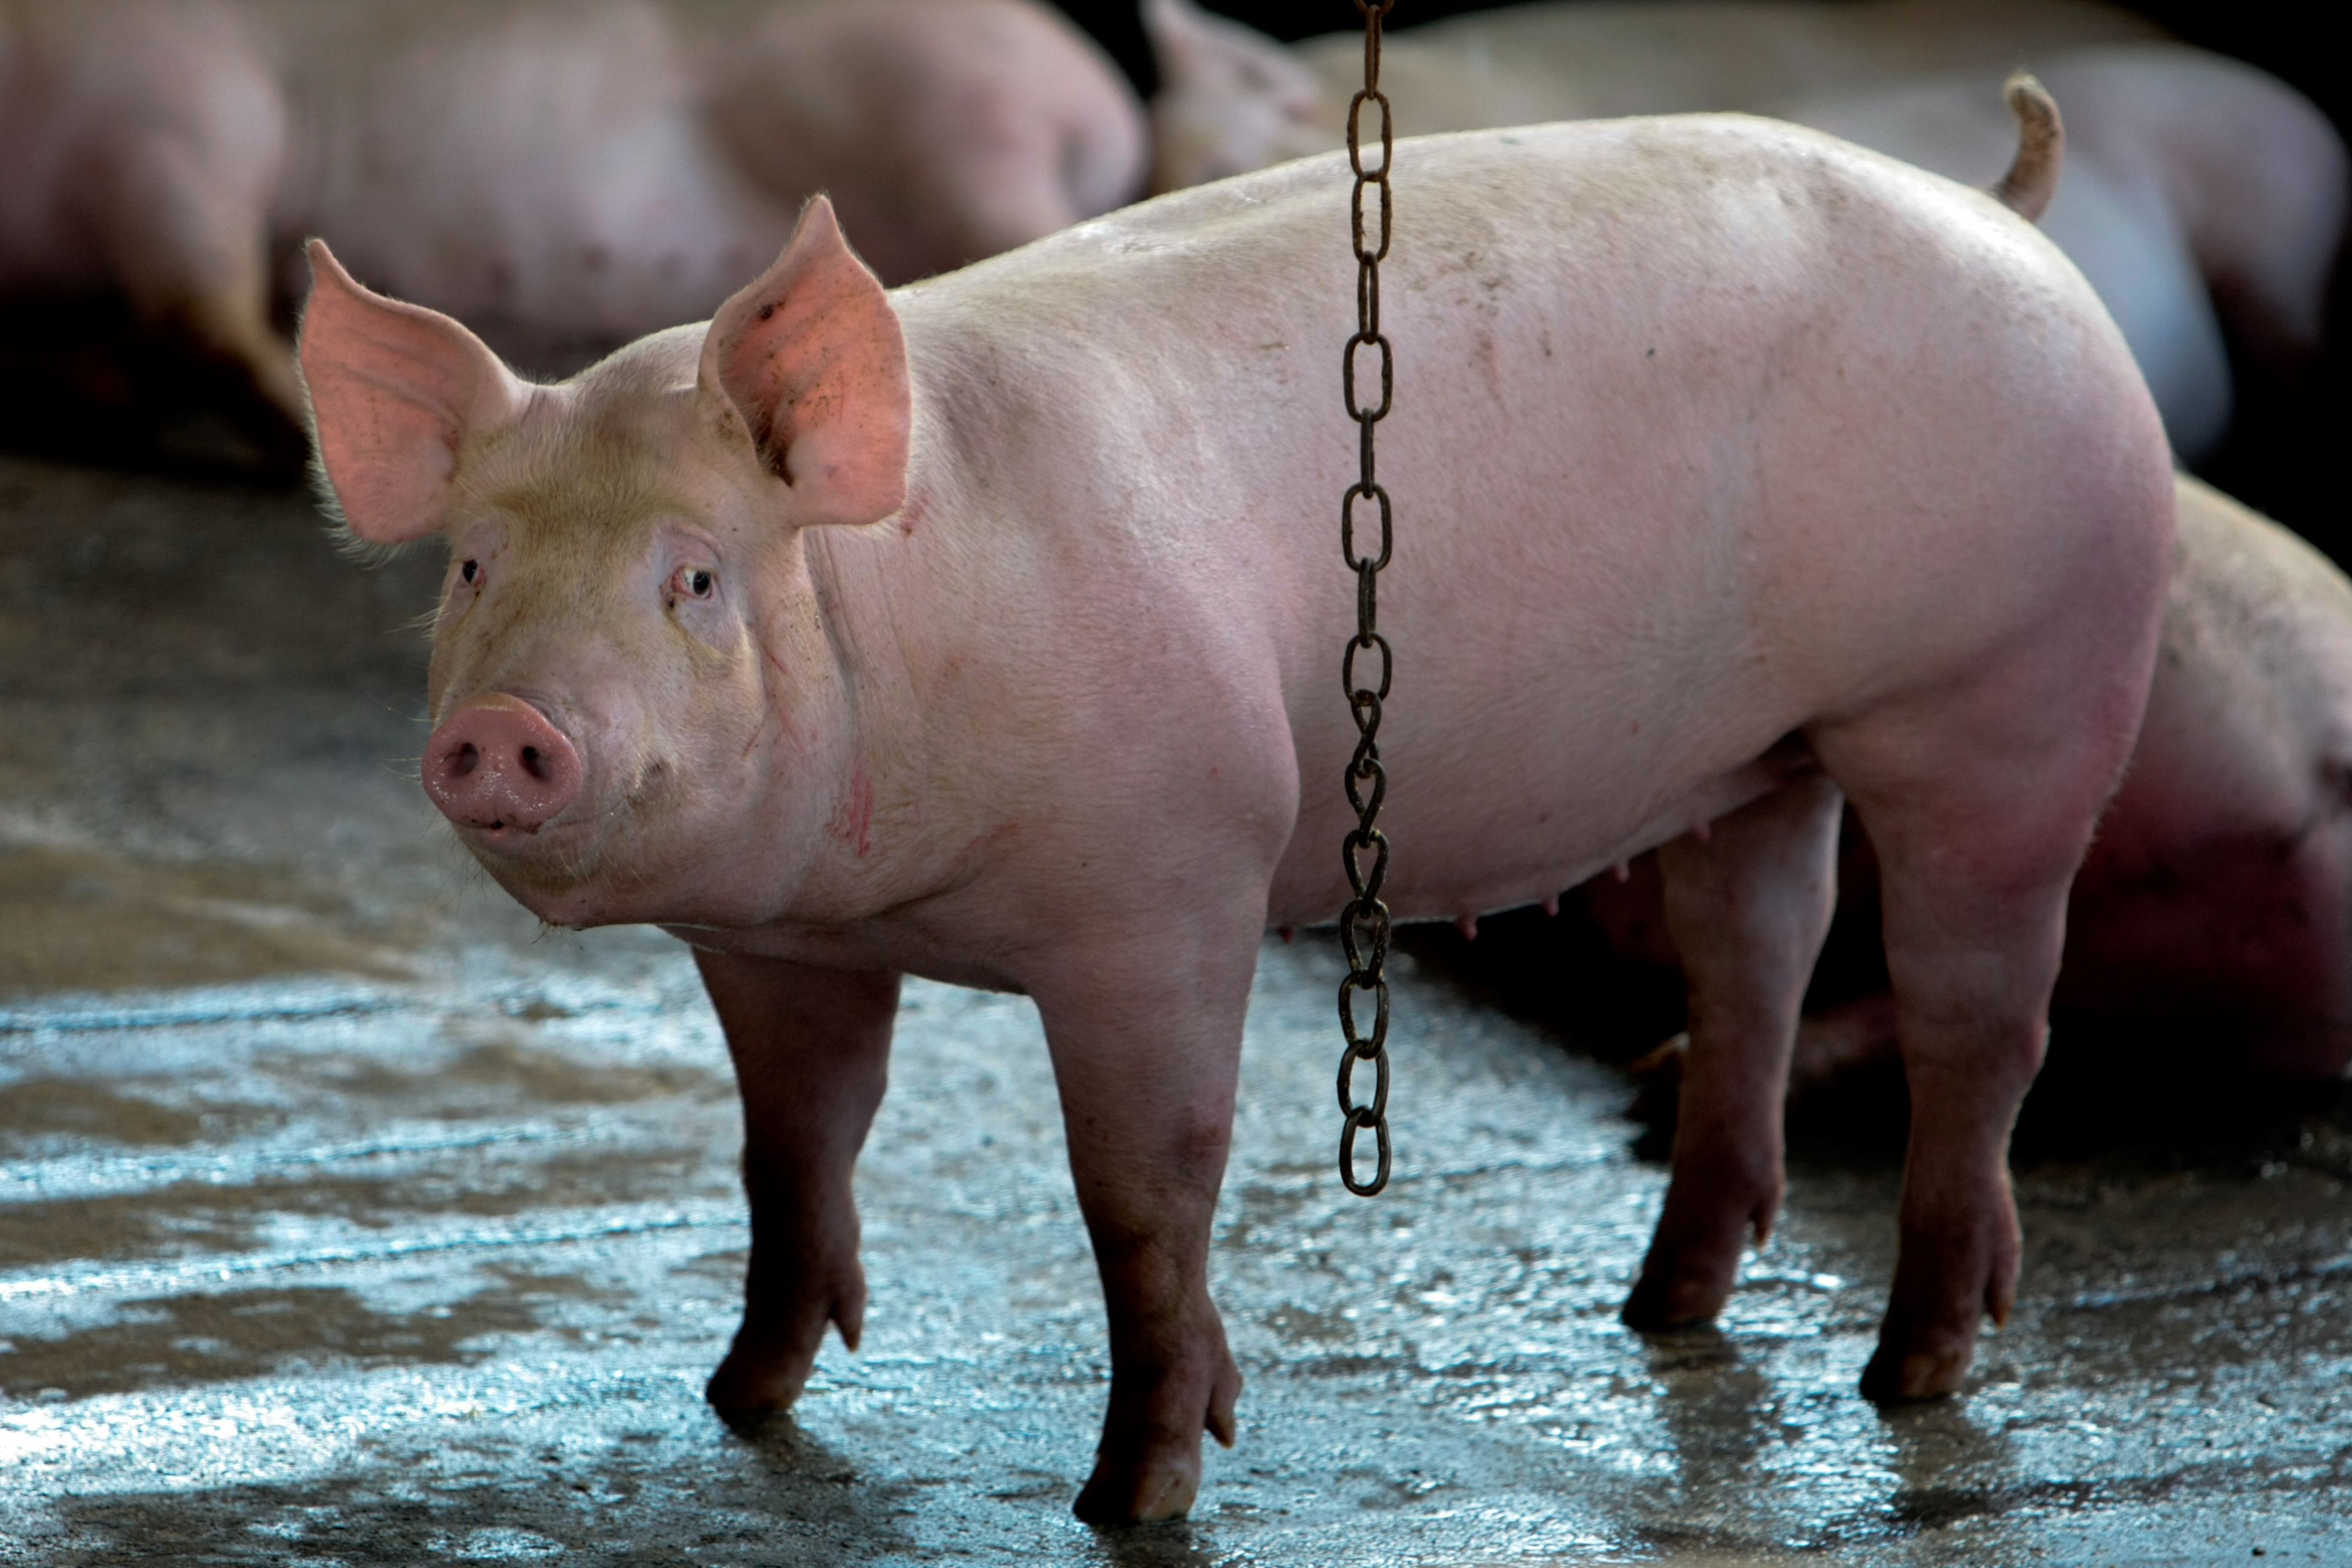 a pig stands next to a chain which is designed as enrichment